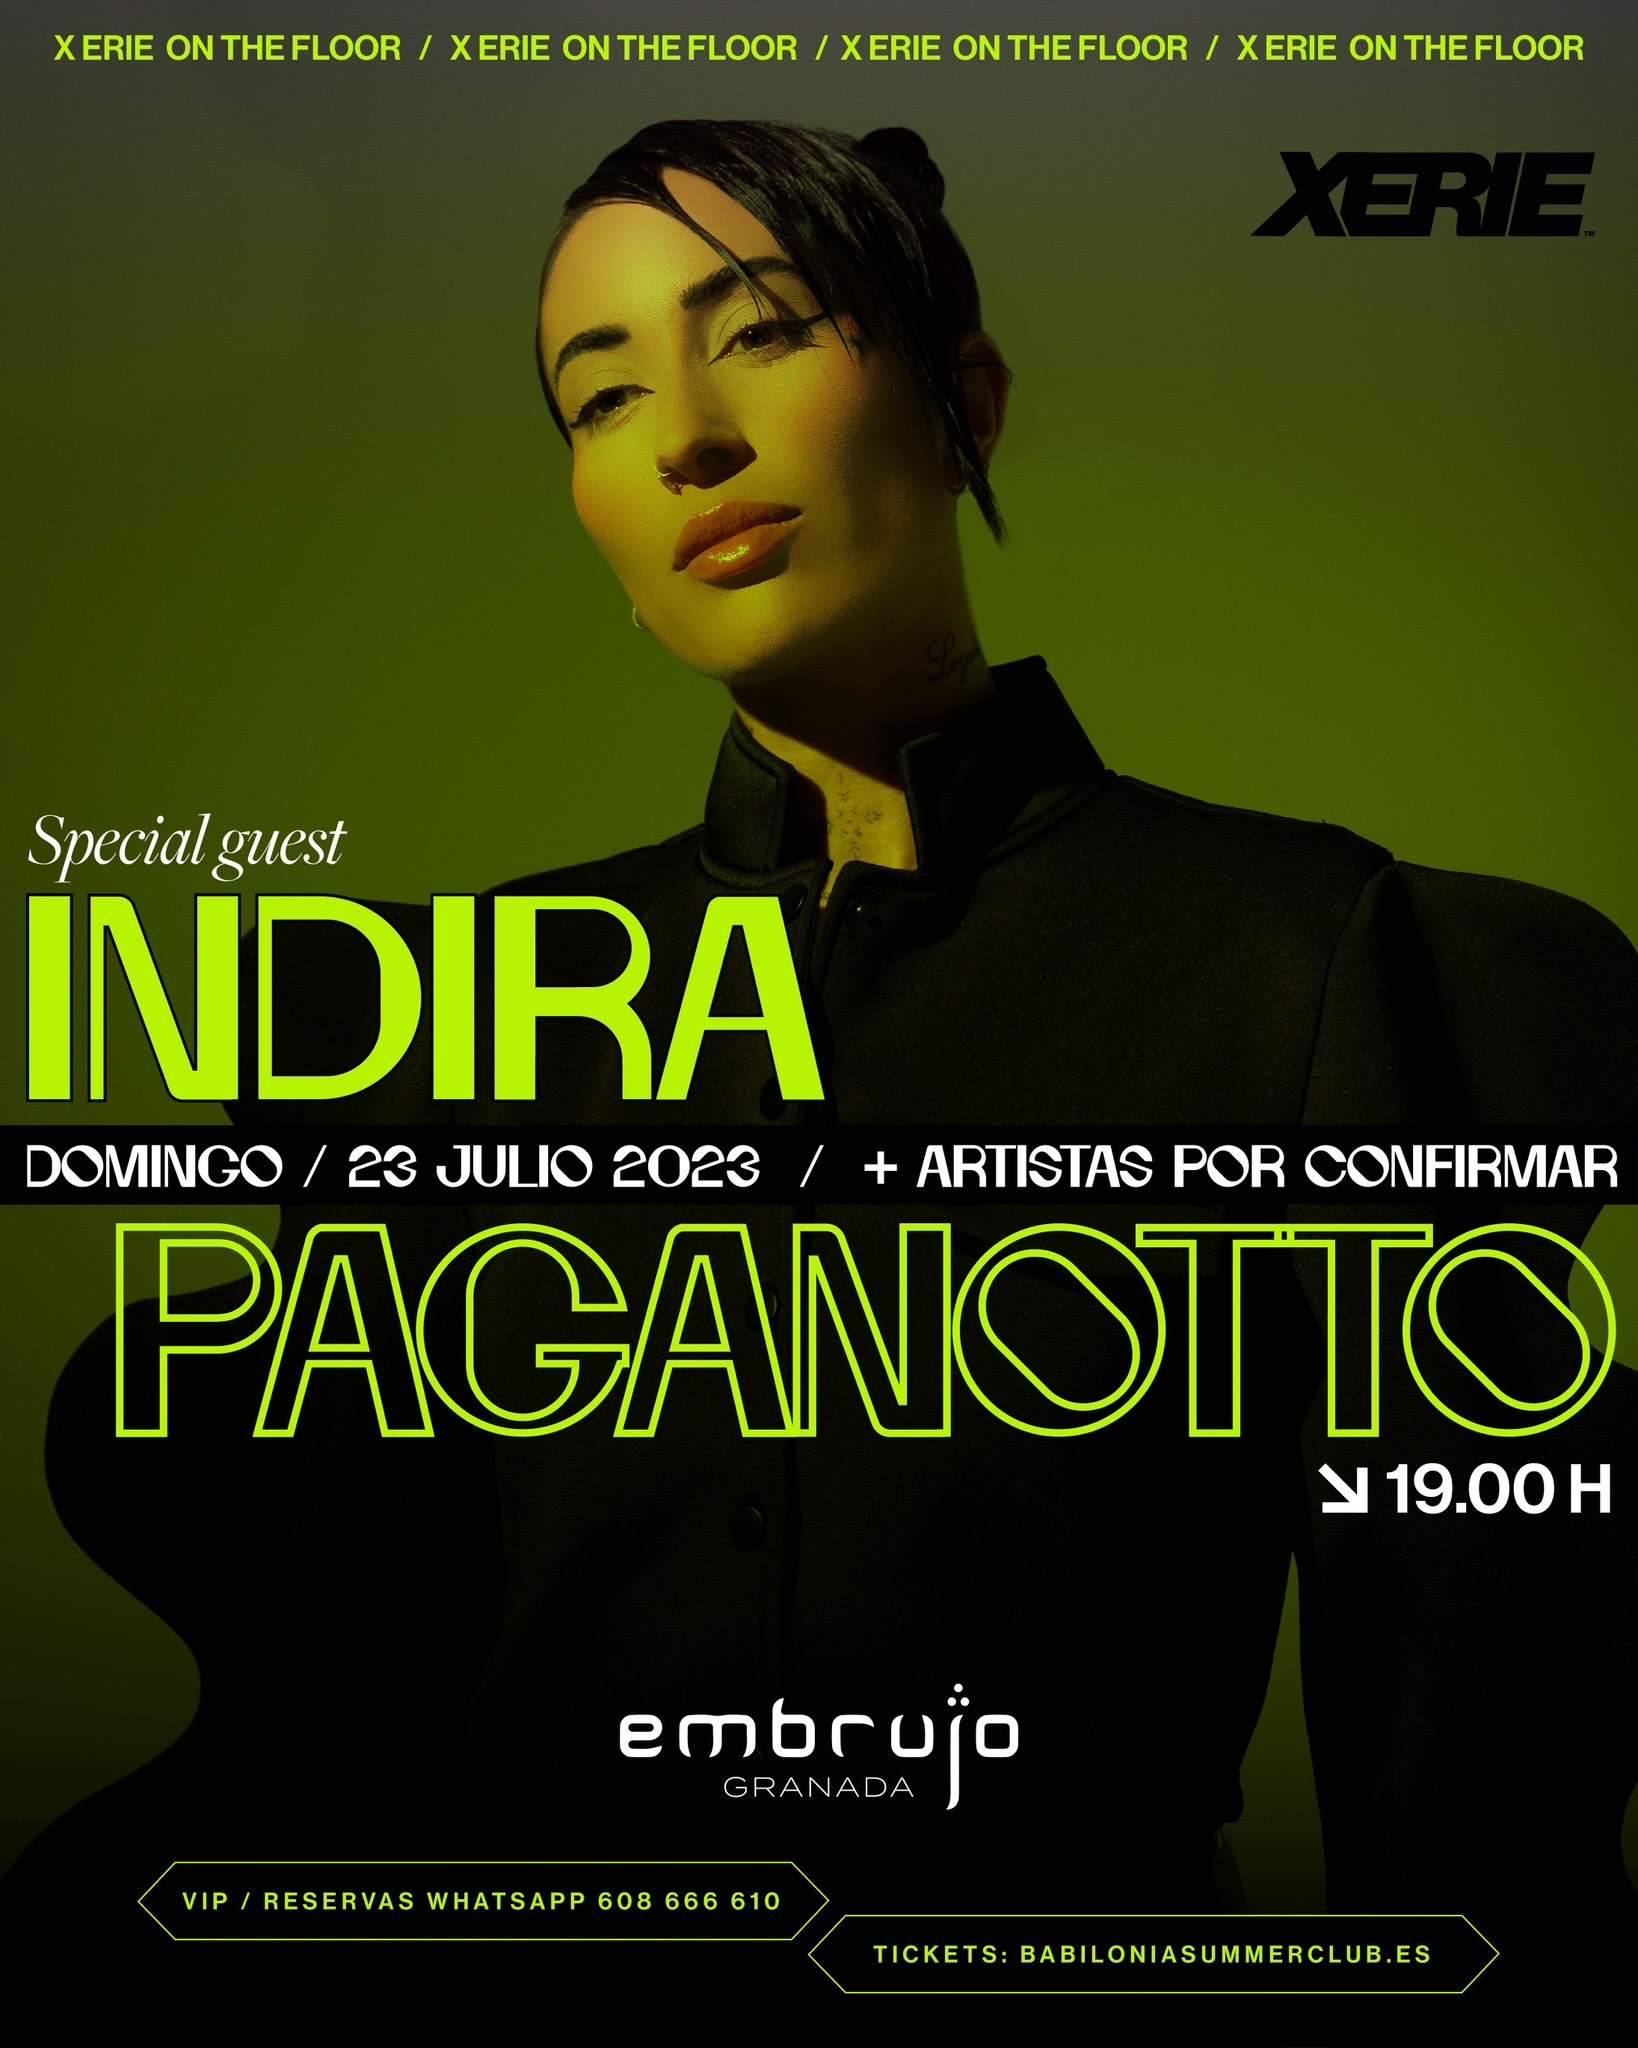 X Erie on the floor with Indira Paganotto + guests - フライヤー表